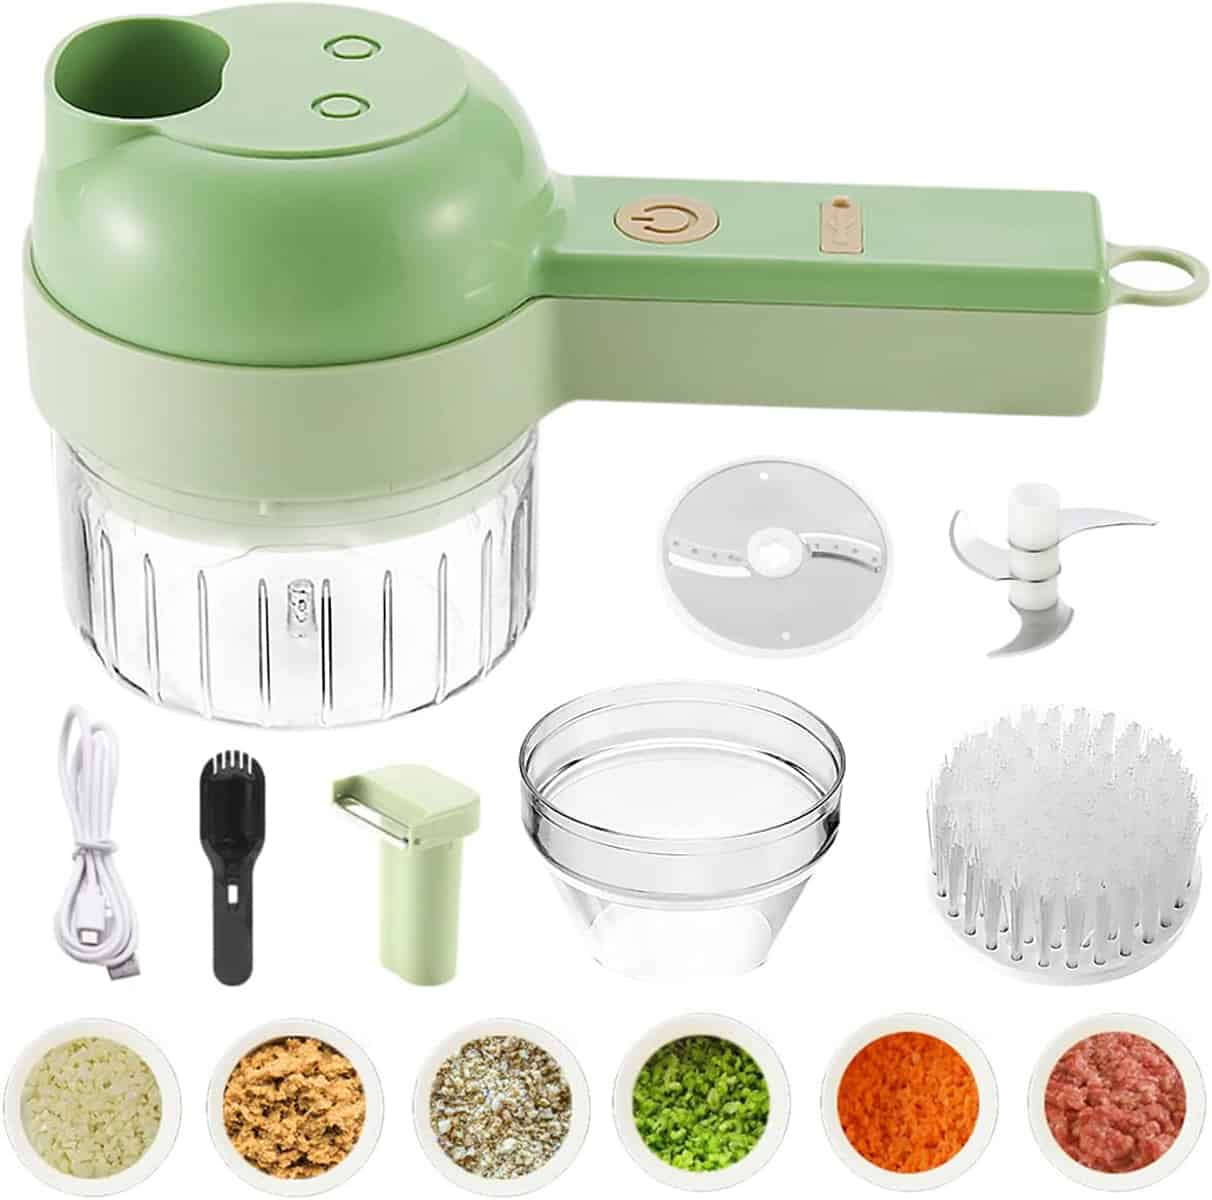 NEW Food Processor FOOD CHOPPER.GREAT FOR SALSA MAKING. By